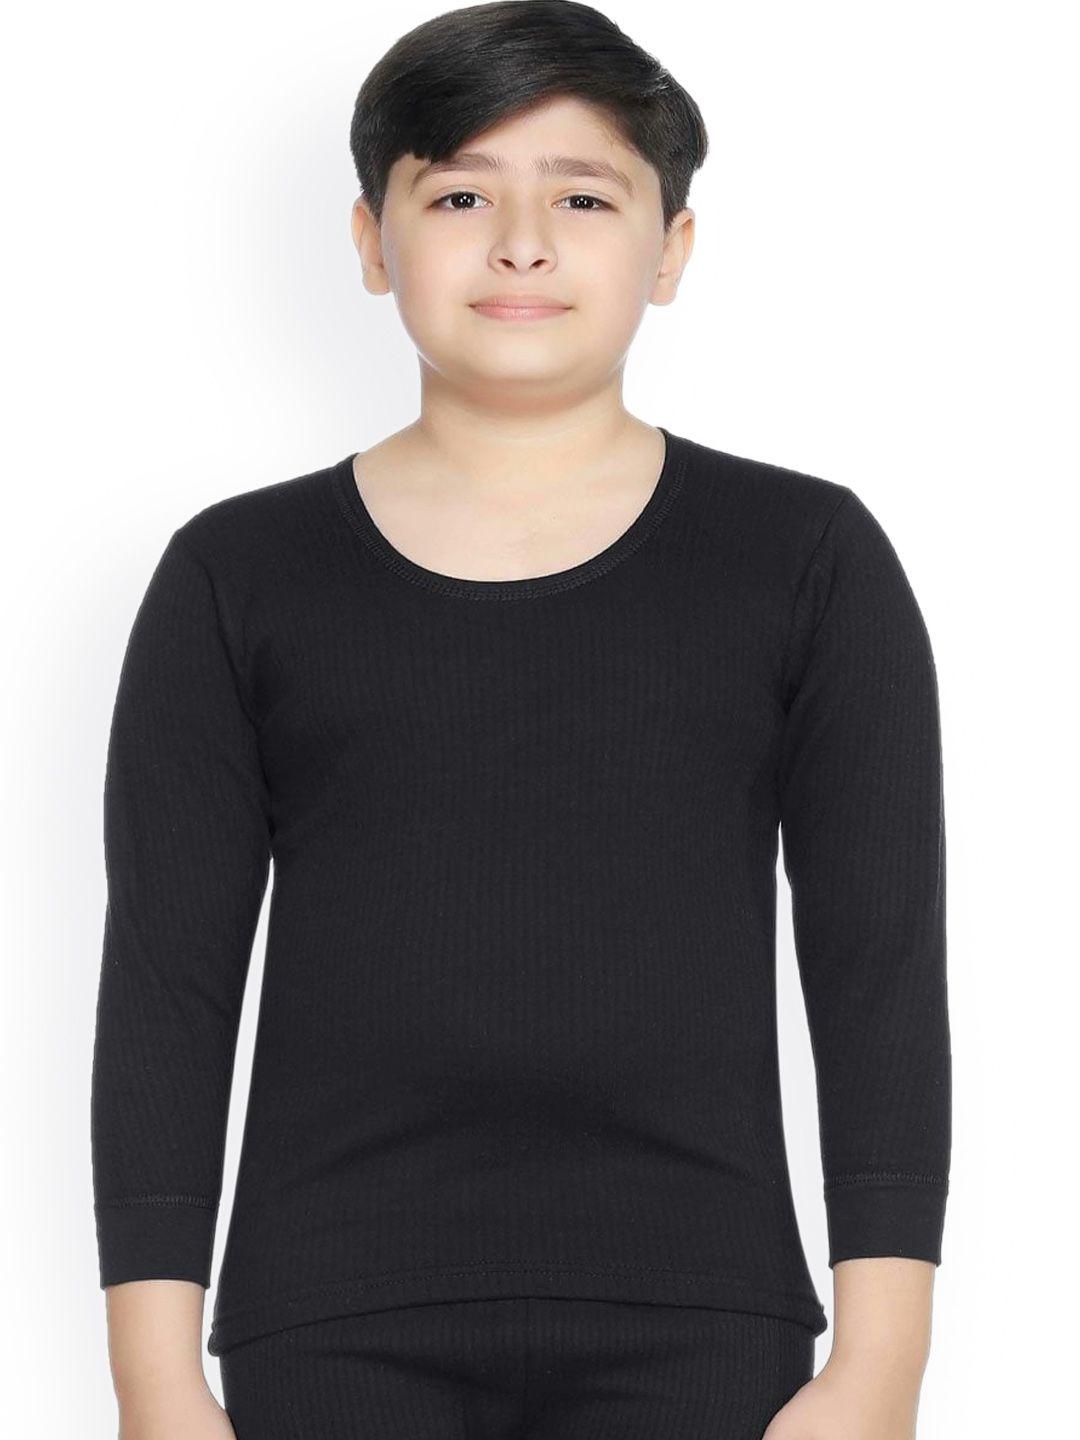 bodycare kids black solid cotton thermal tops